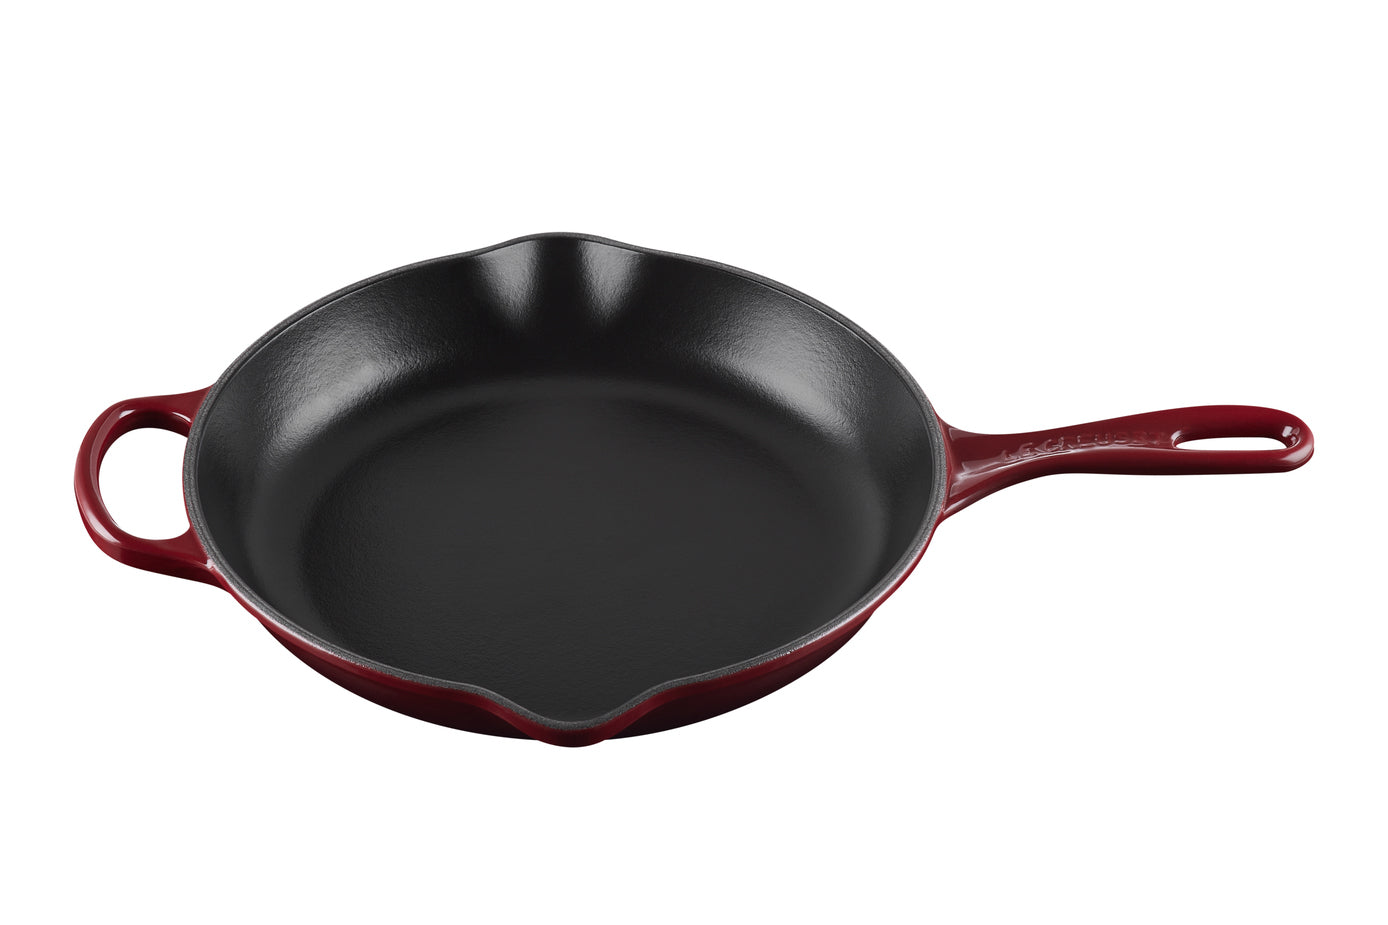 Le Creuset 10 1/4 inch Cast Iron Grill Pan 